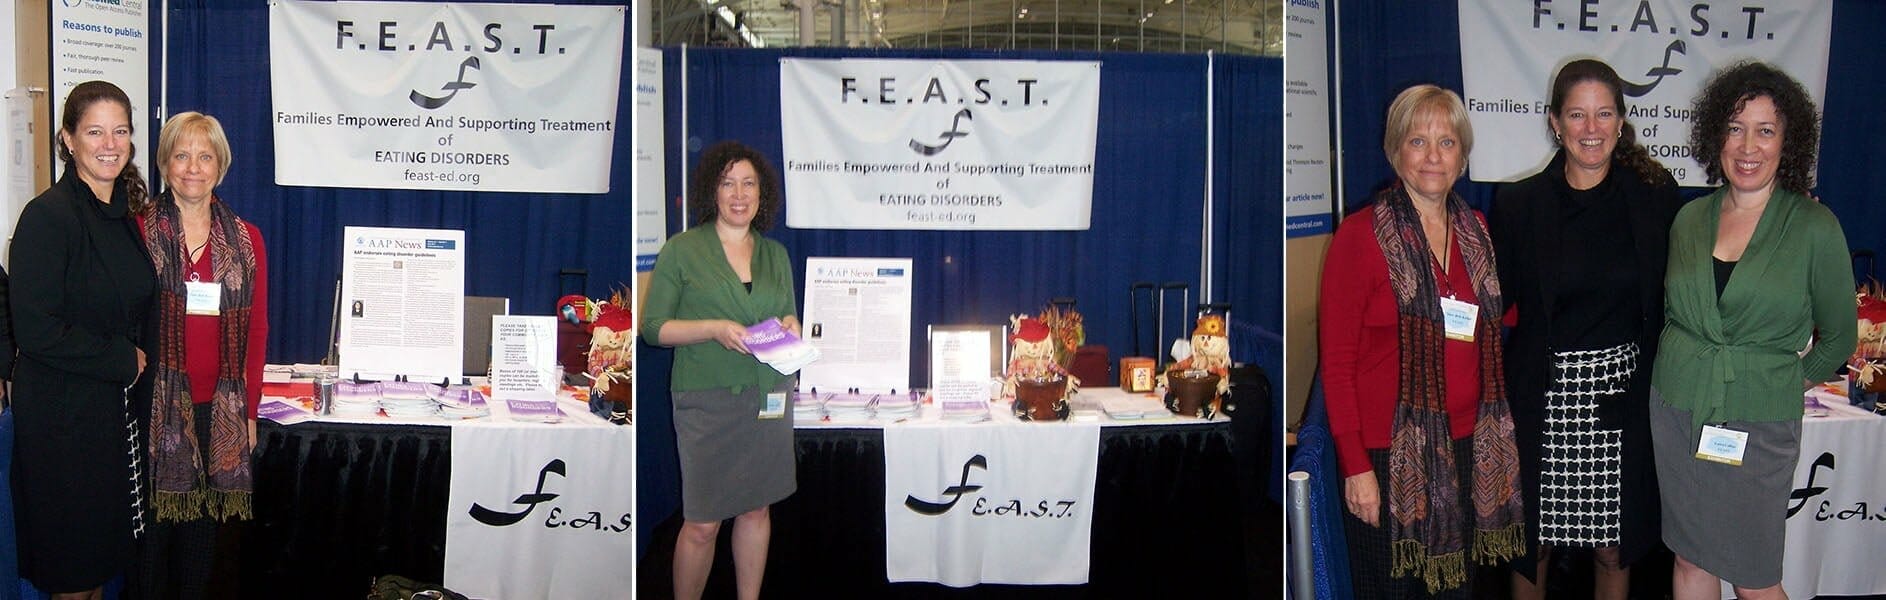 FEAST History NEDA Exhibition 2008 - 2010 Eating Disorder Parent Support